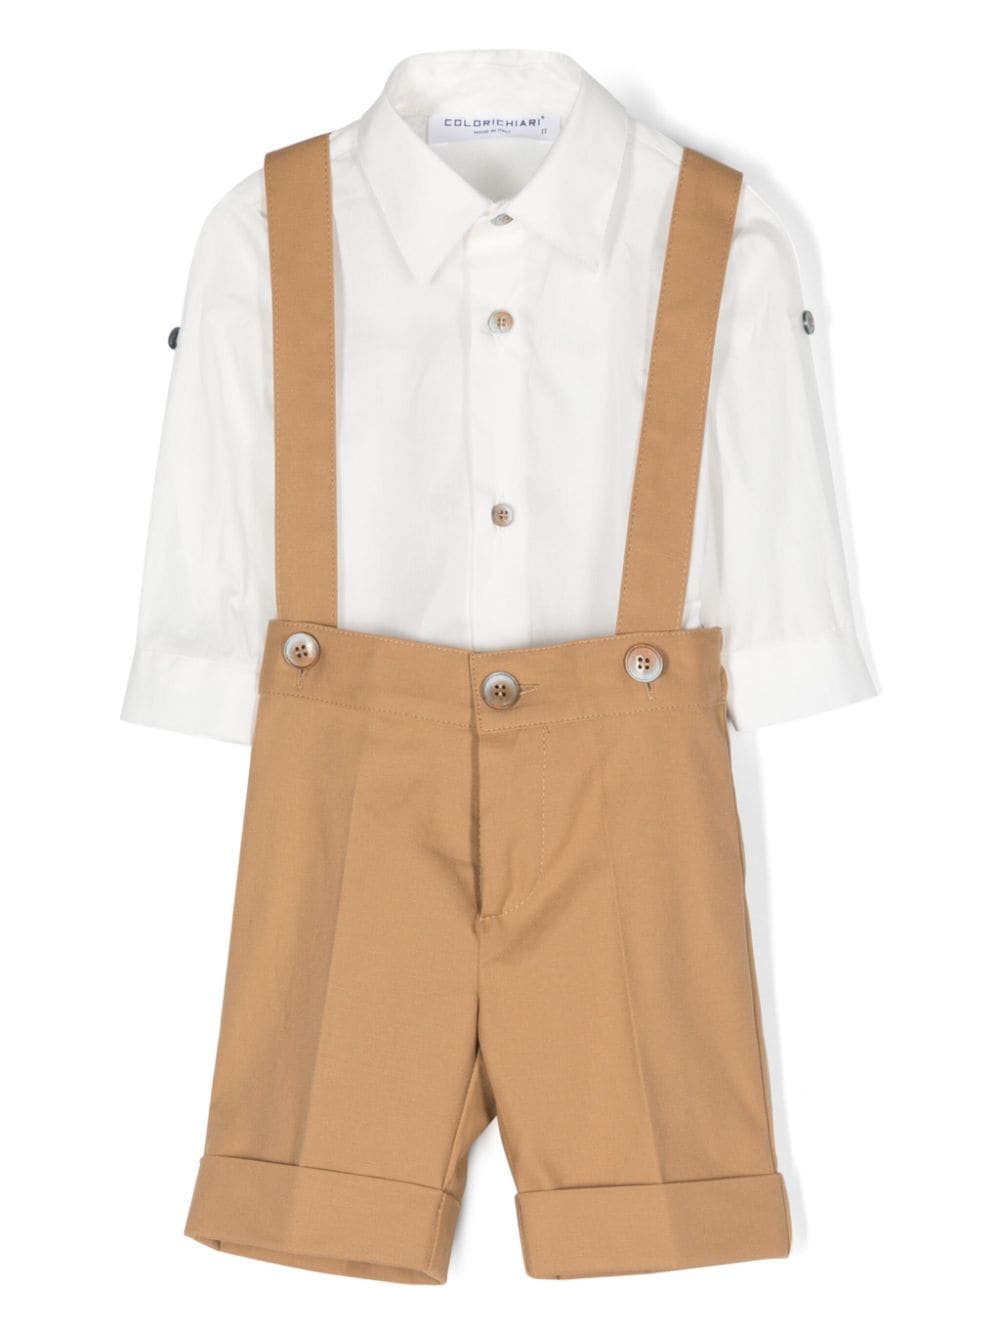 Elegant white and beige outfit for newborns